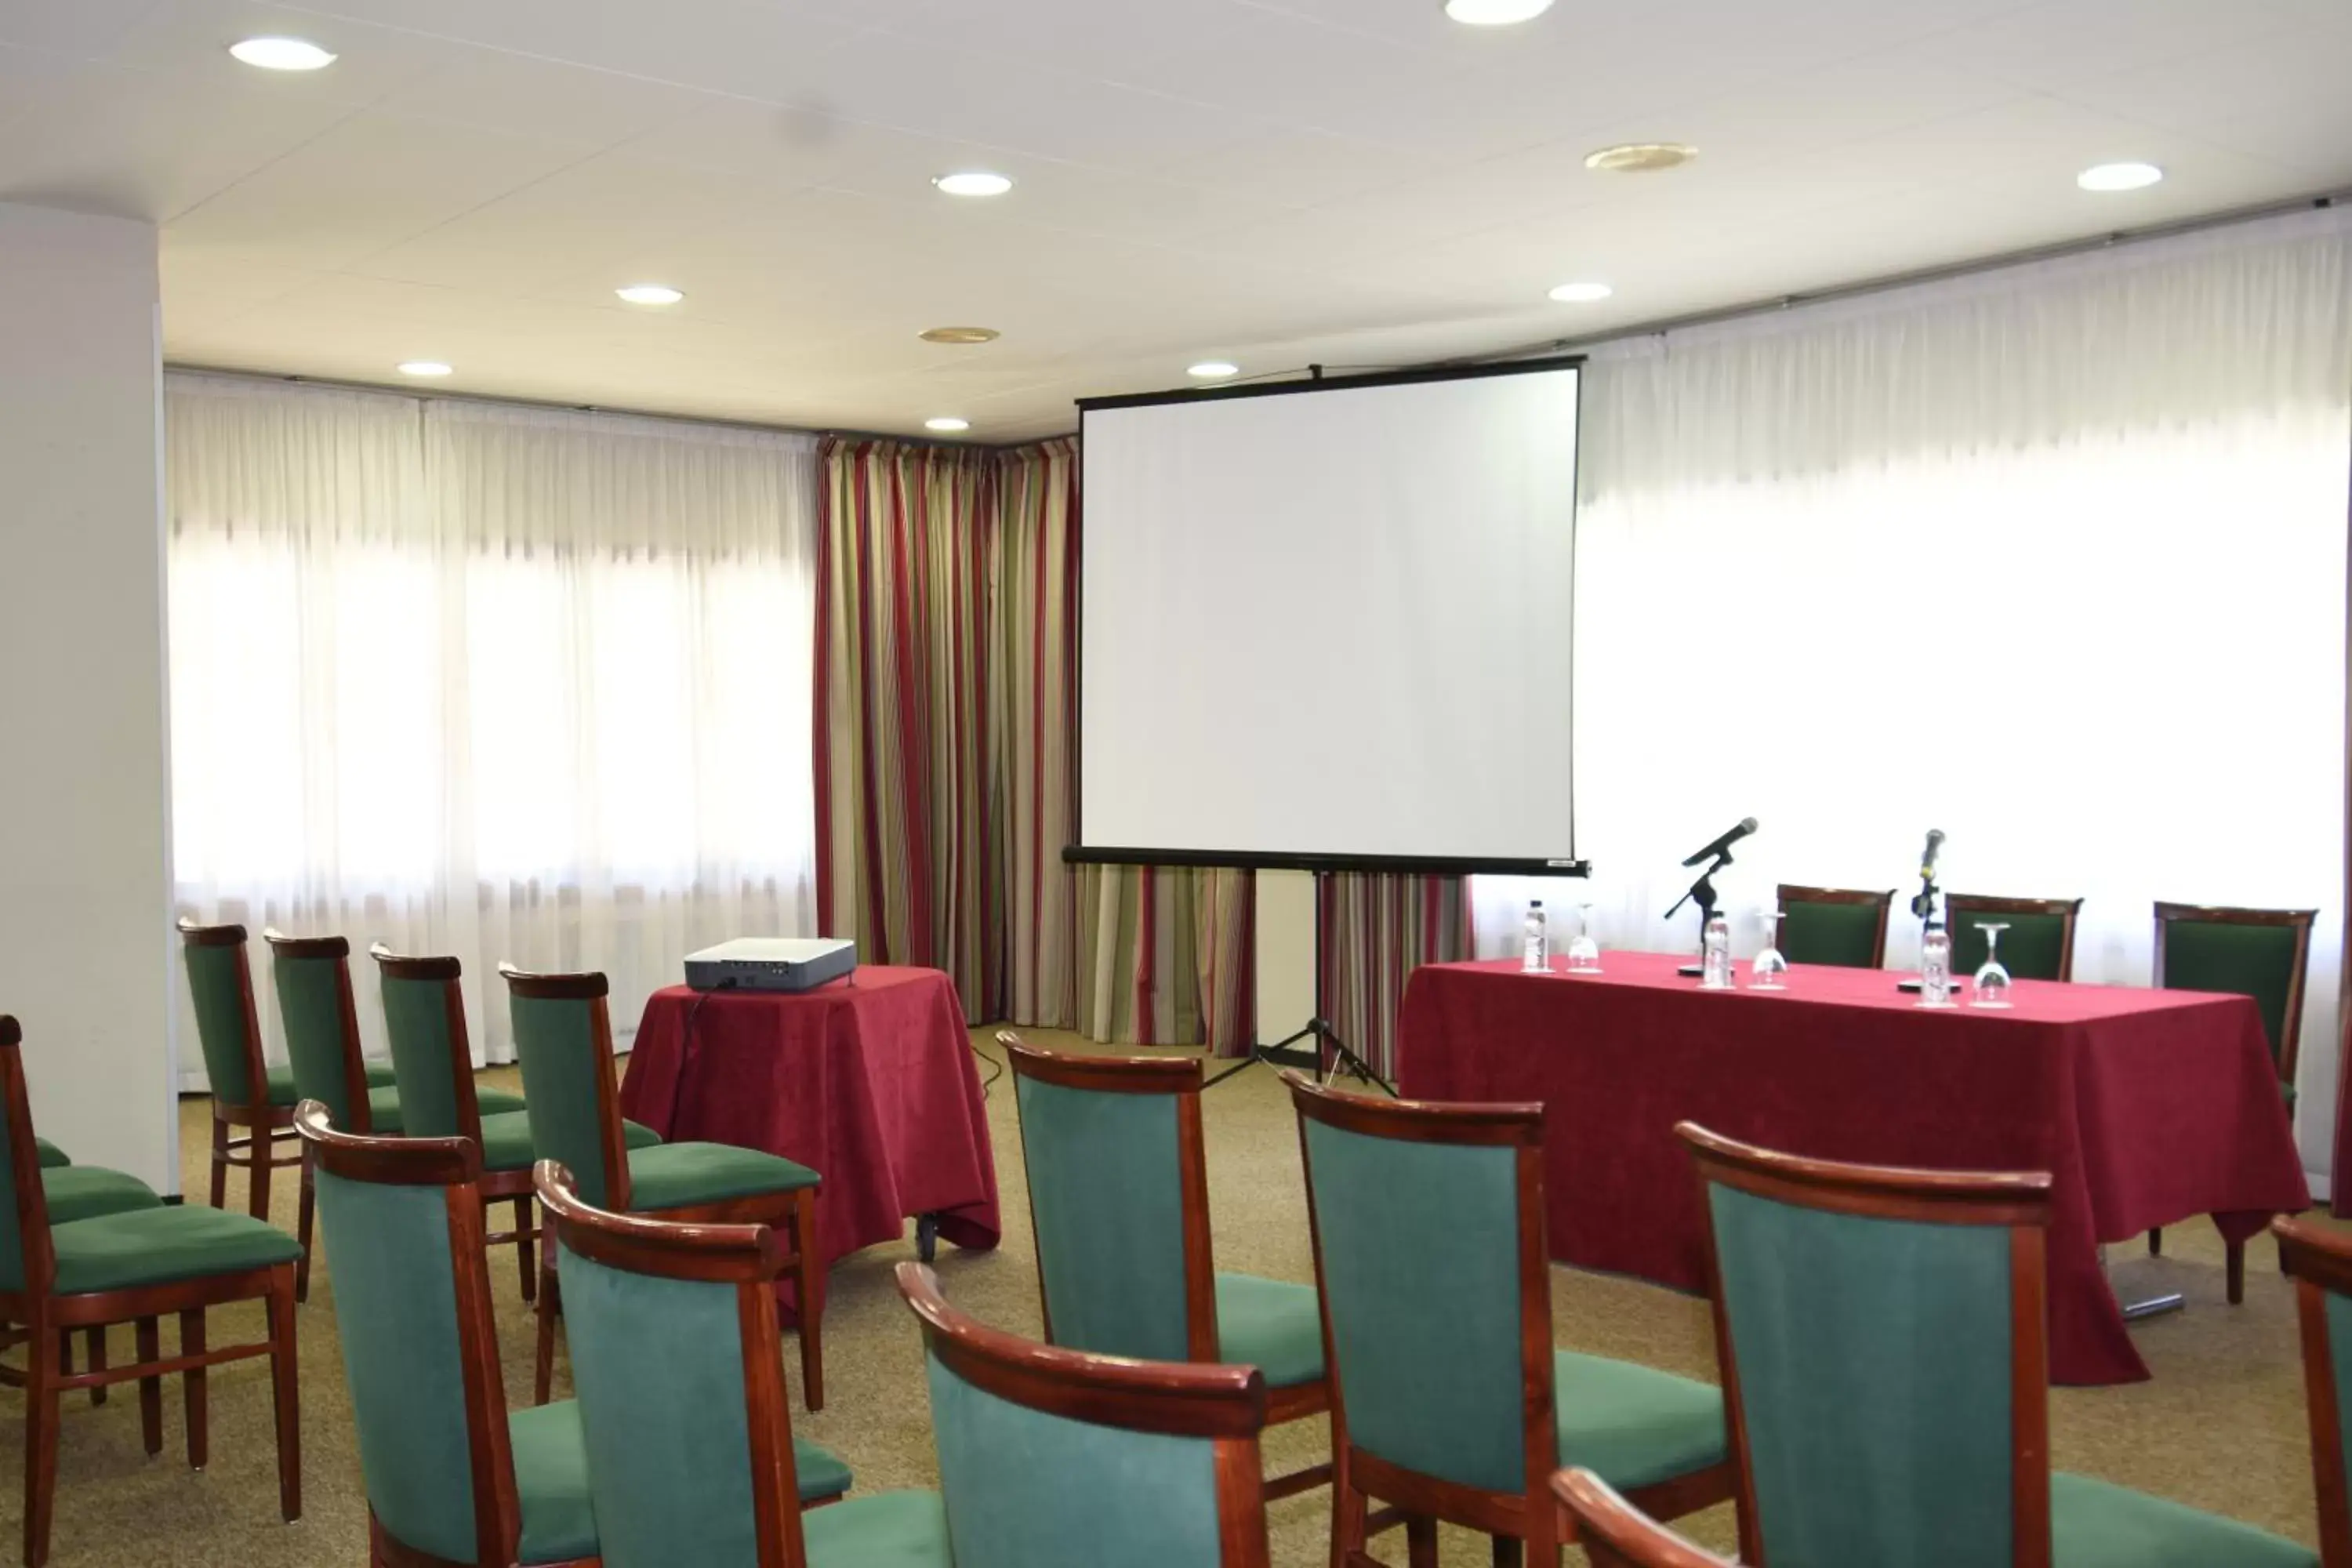 Area and facilities in RVHotels Tuca